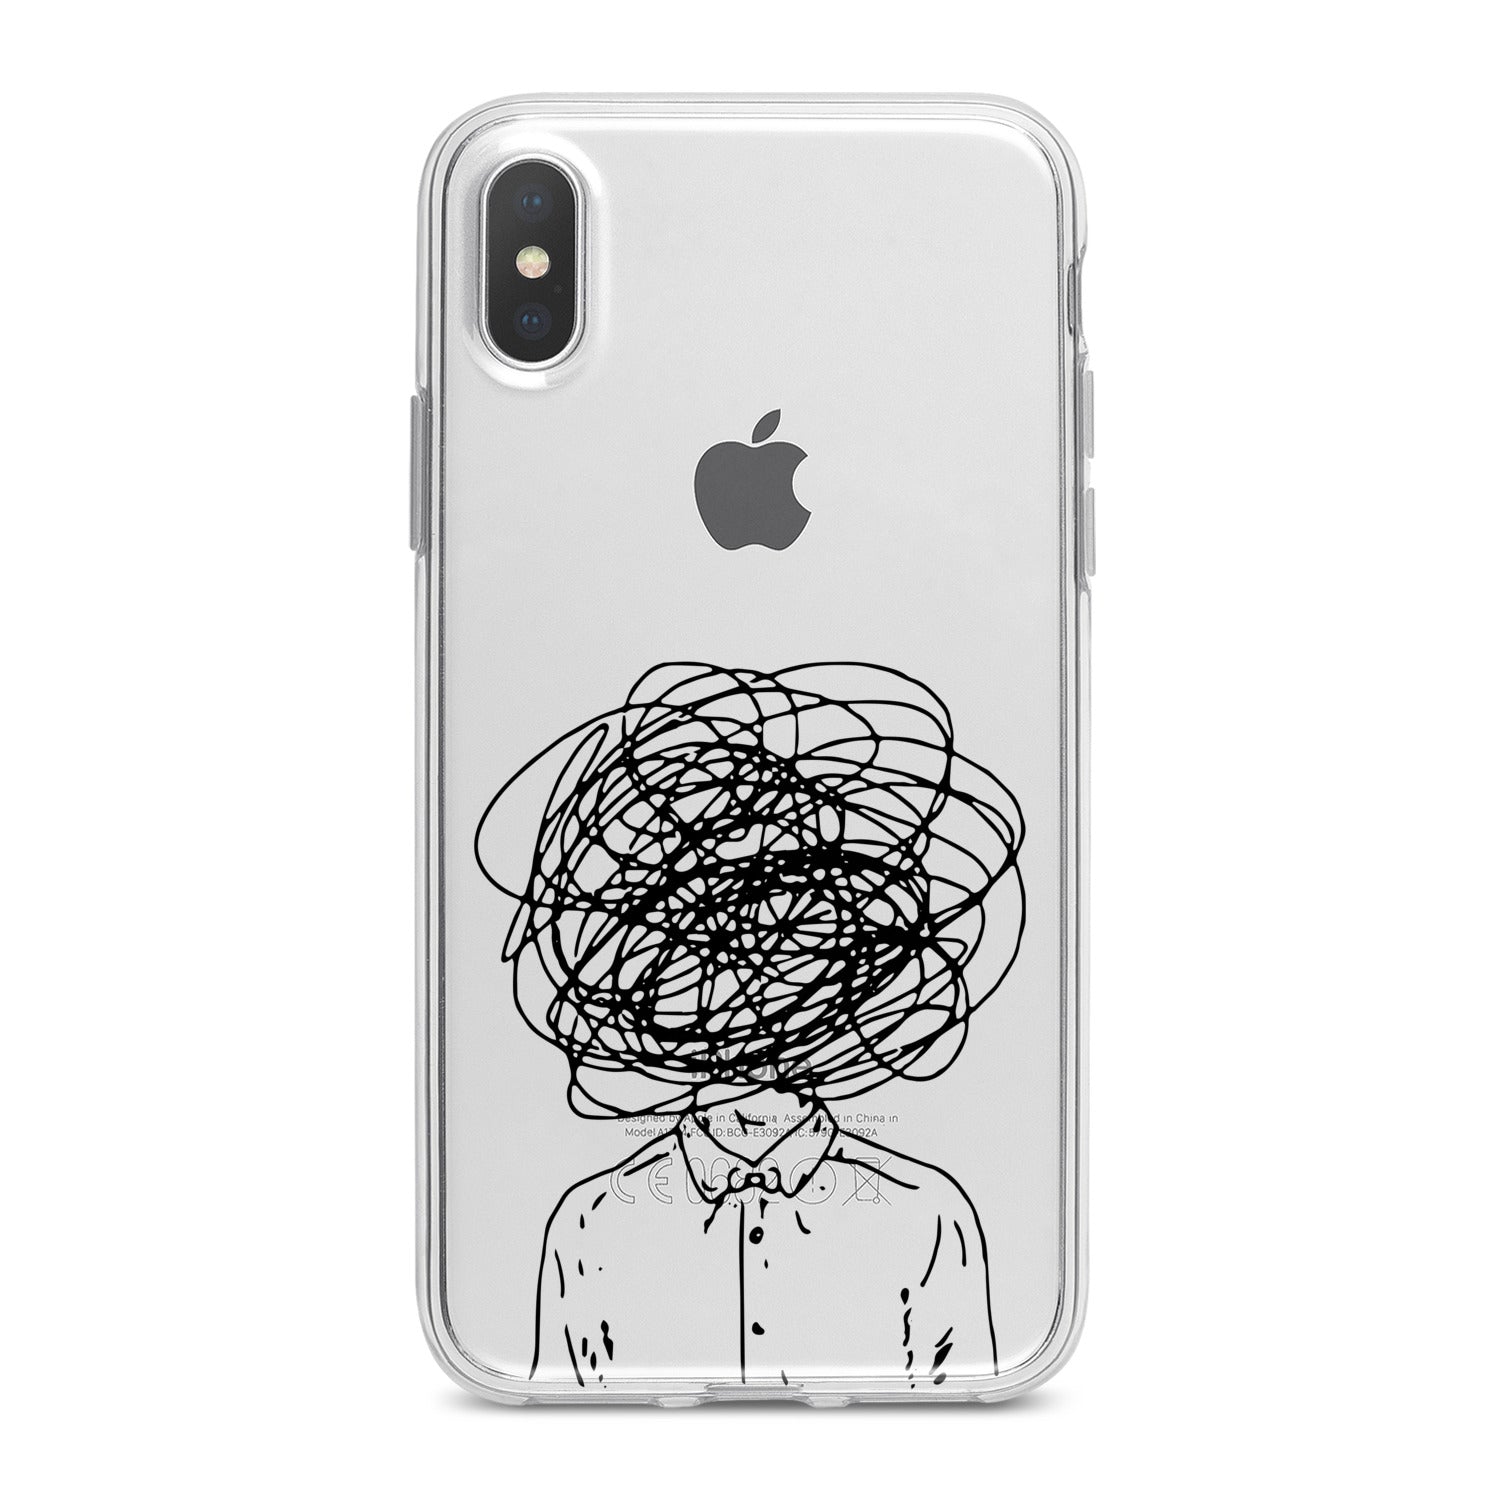 Lex Altern Crazy Mind Phone Case for your iPhone & Android phone.